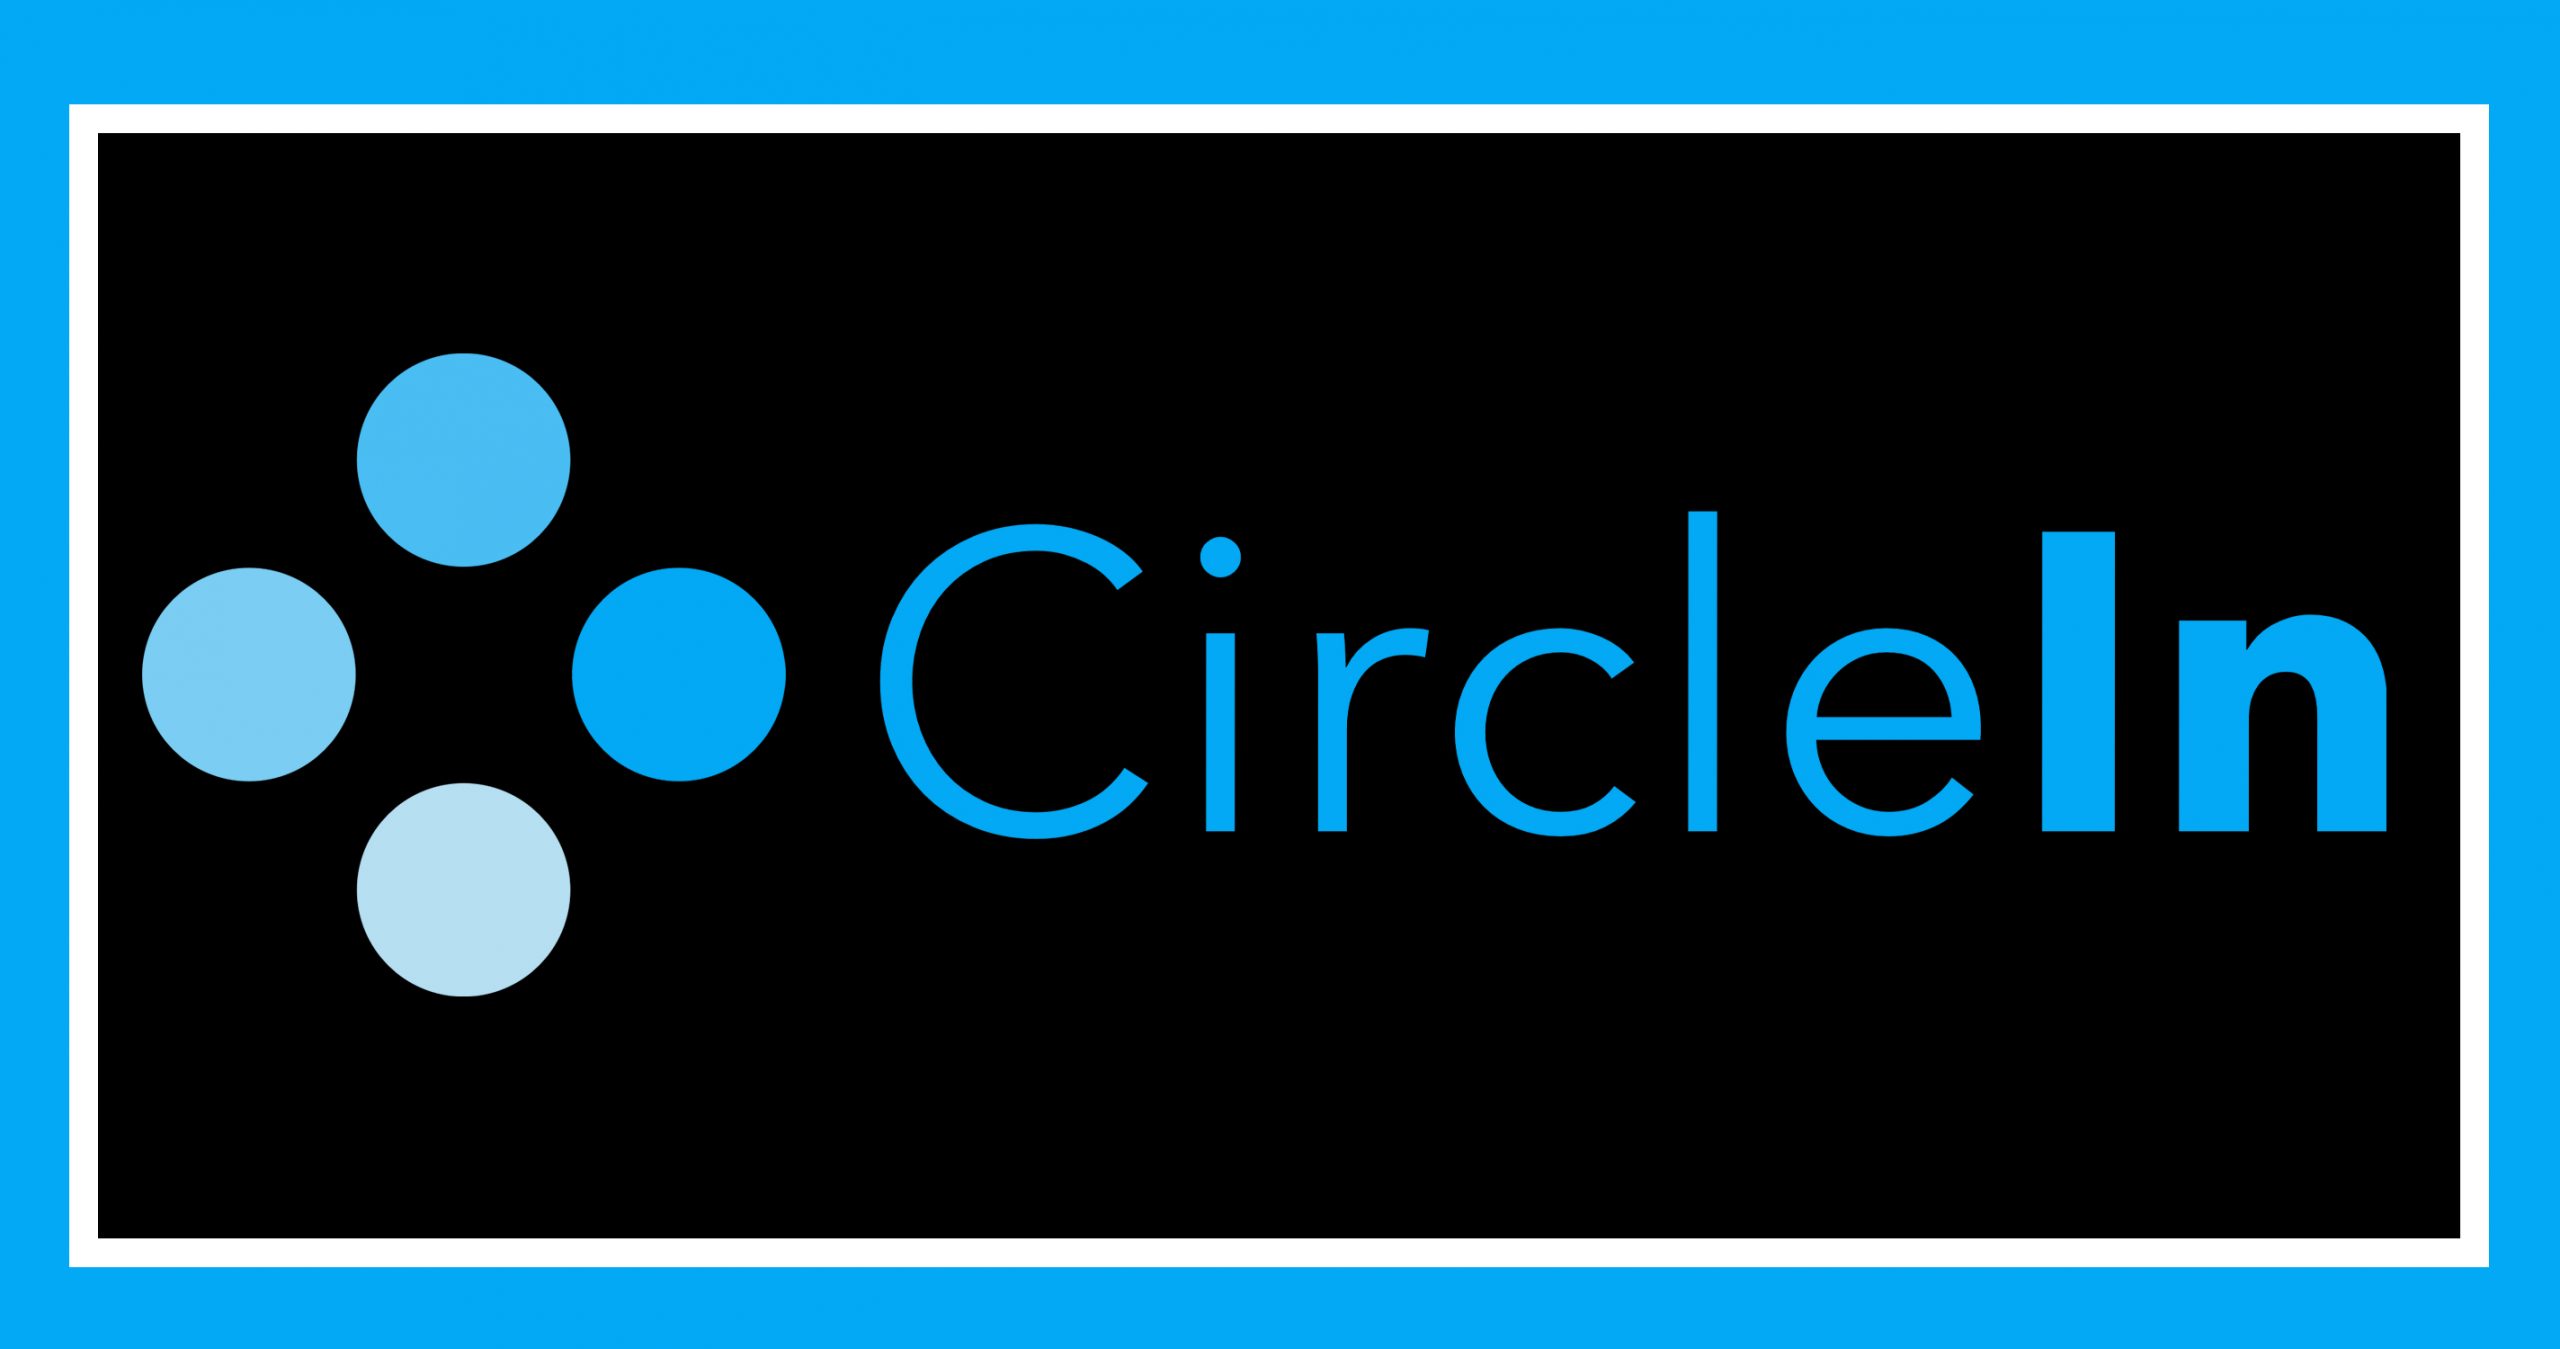 CircleIn app provides further connectivity among students